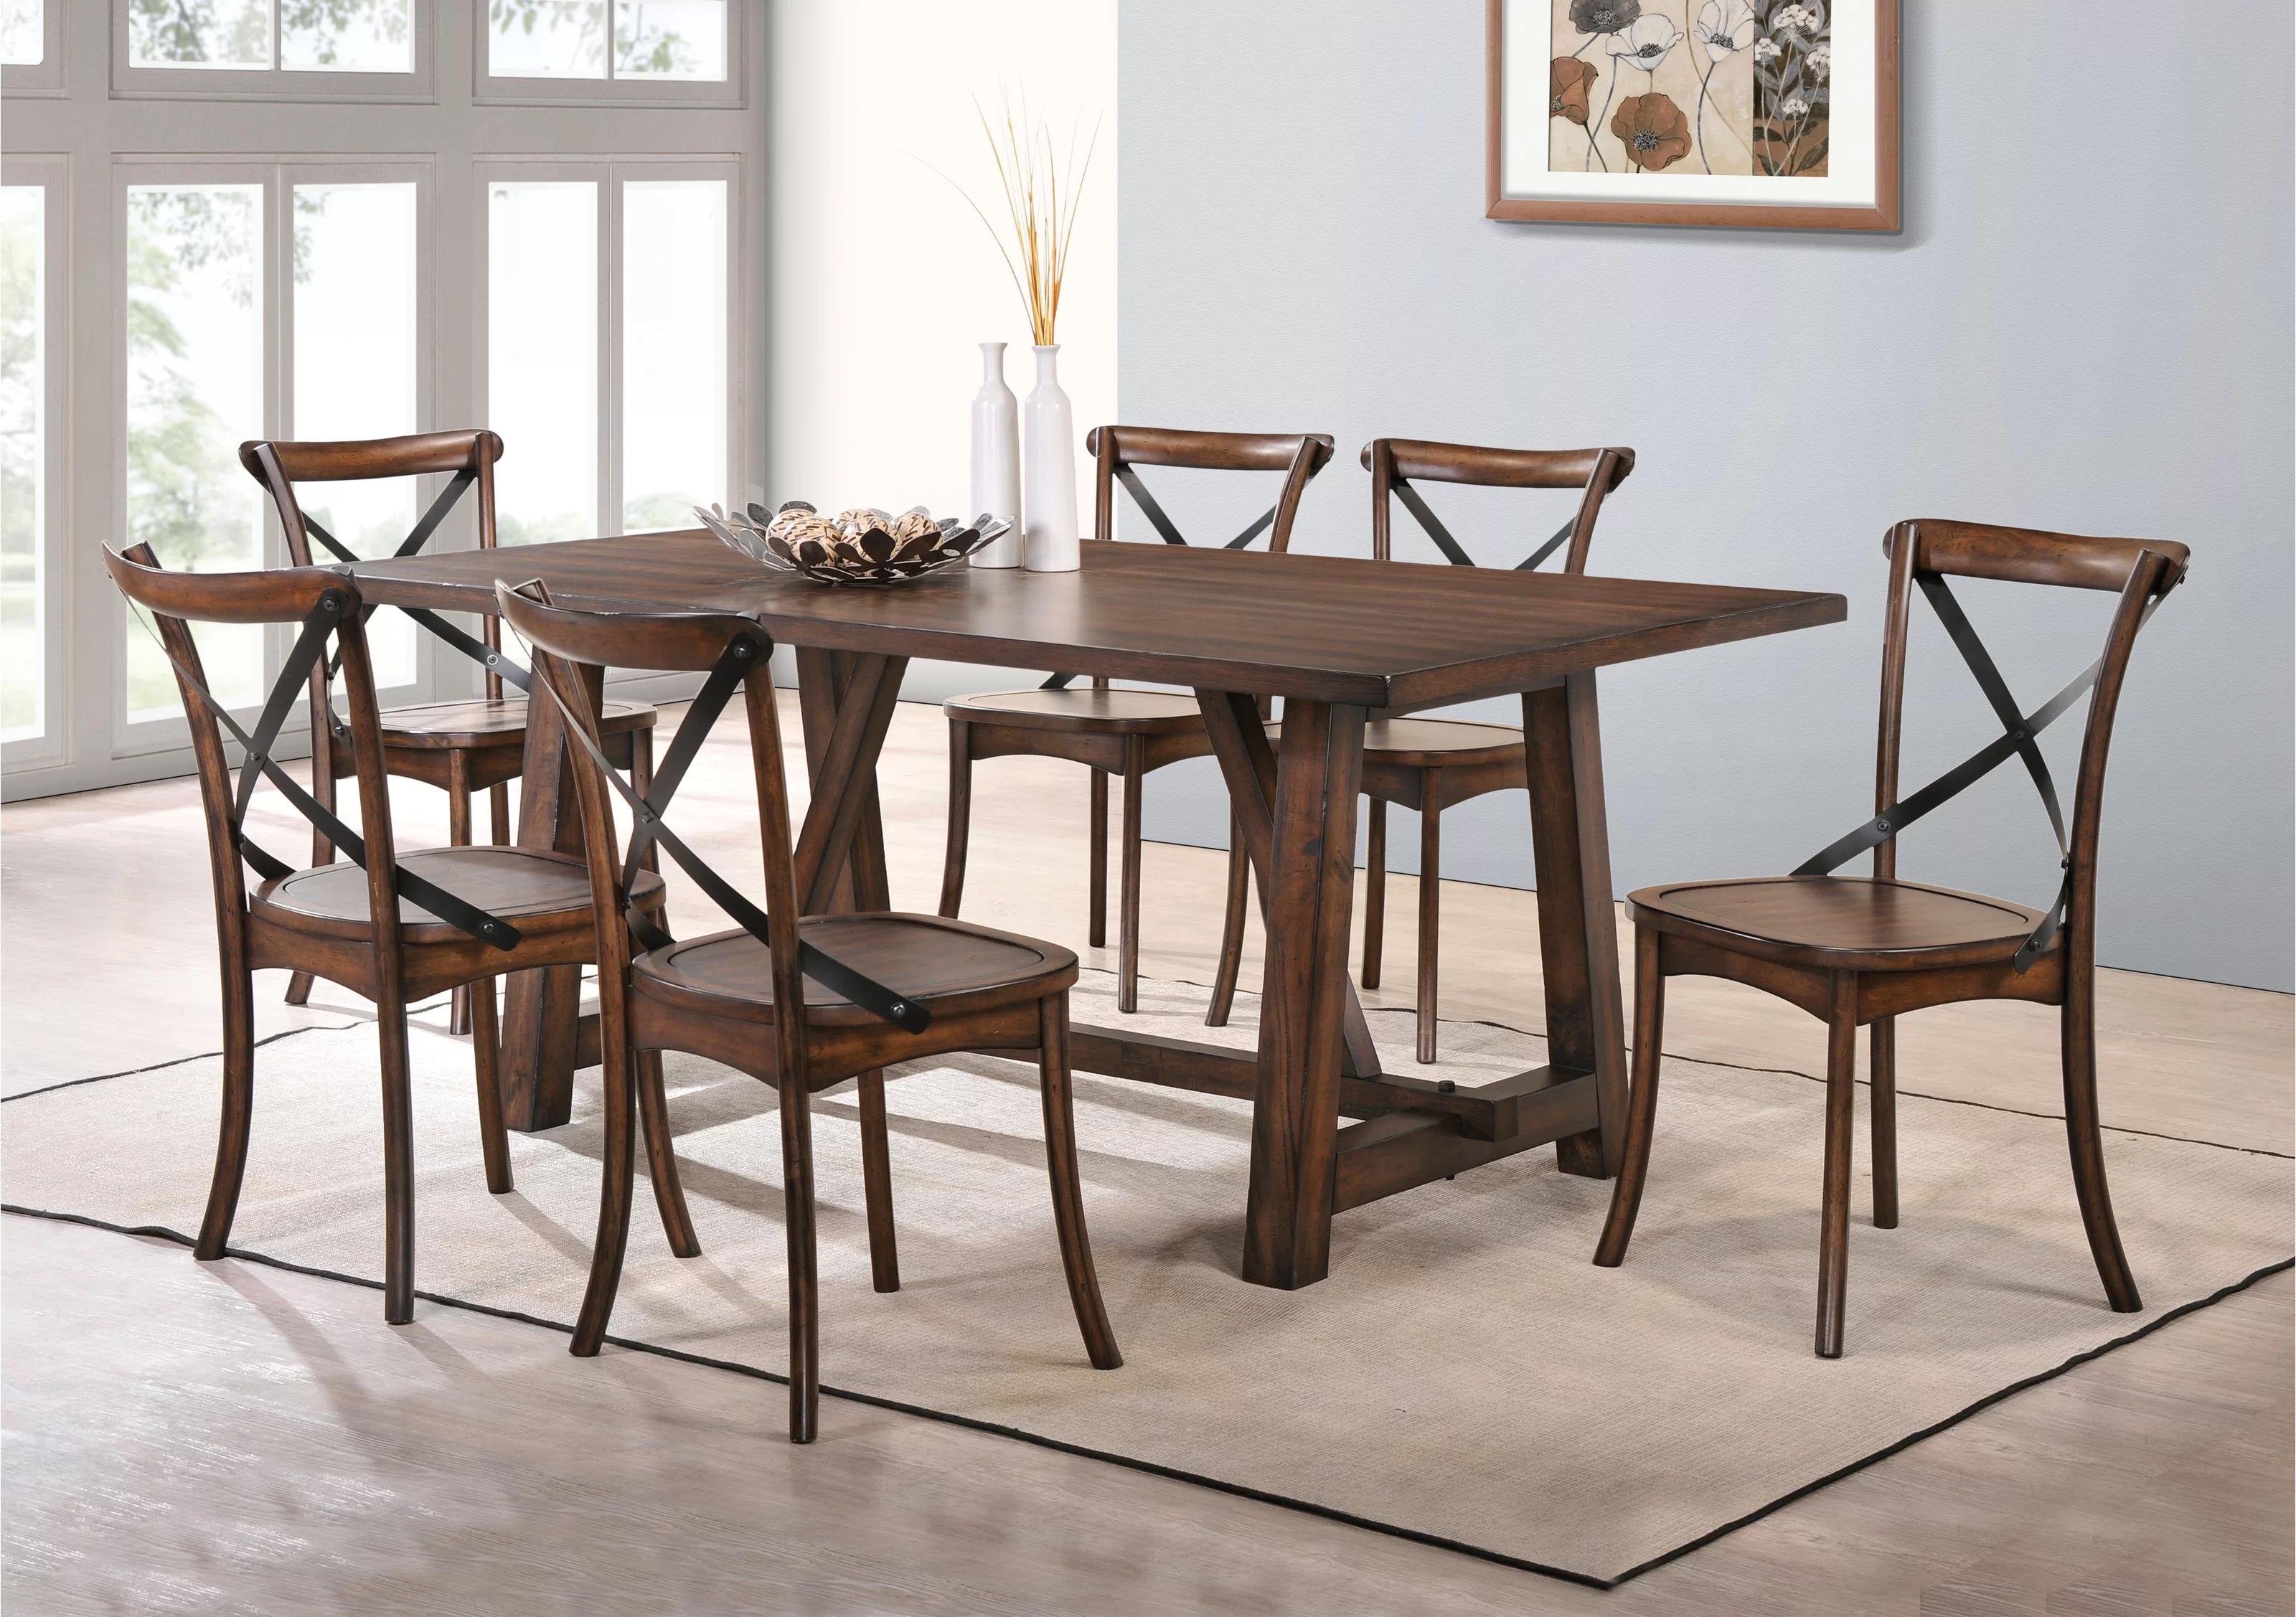 

    
Rustic Dark Oak Dining Table + 8x Chairs by Acme Kaelyn 73030-9pcs
